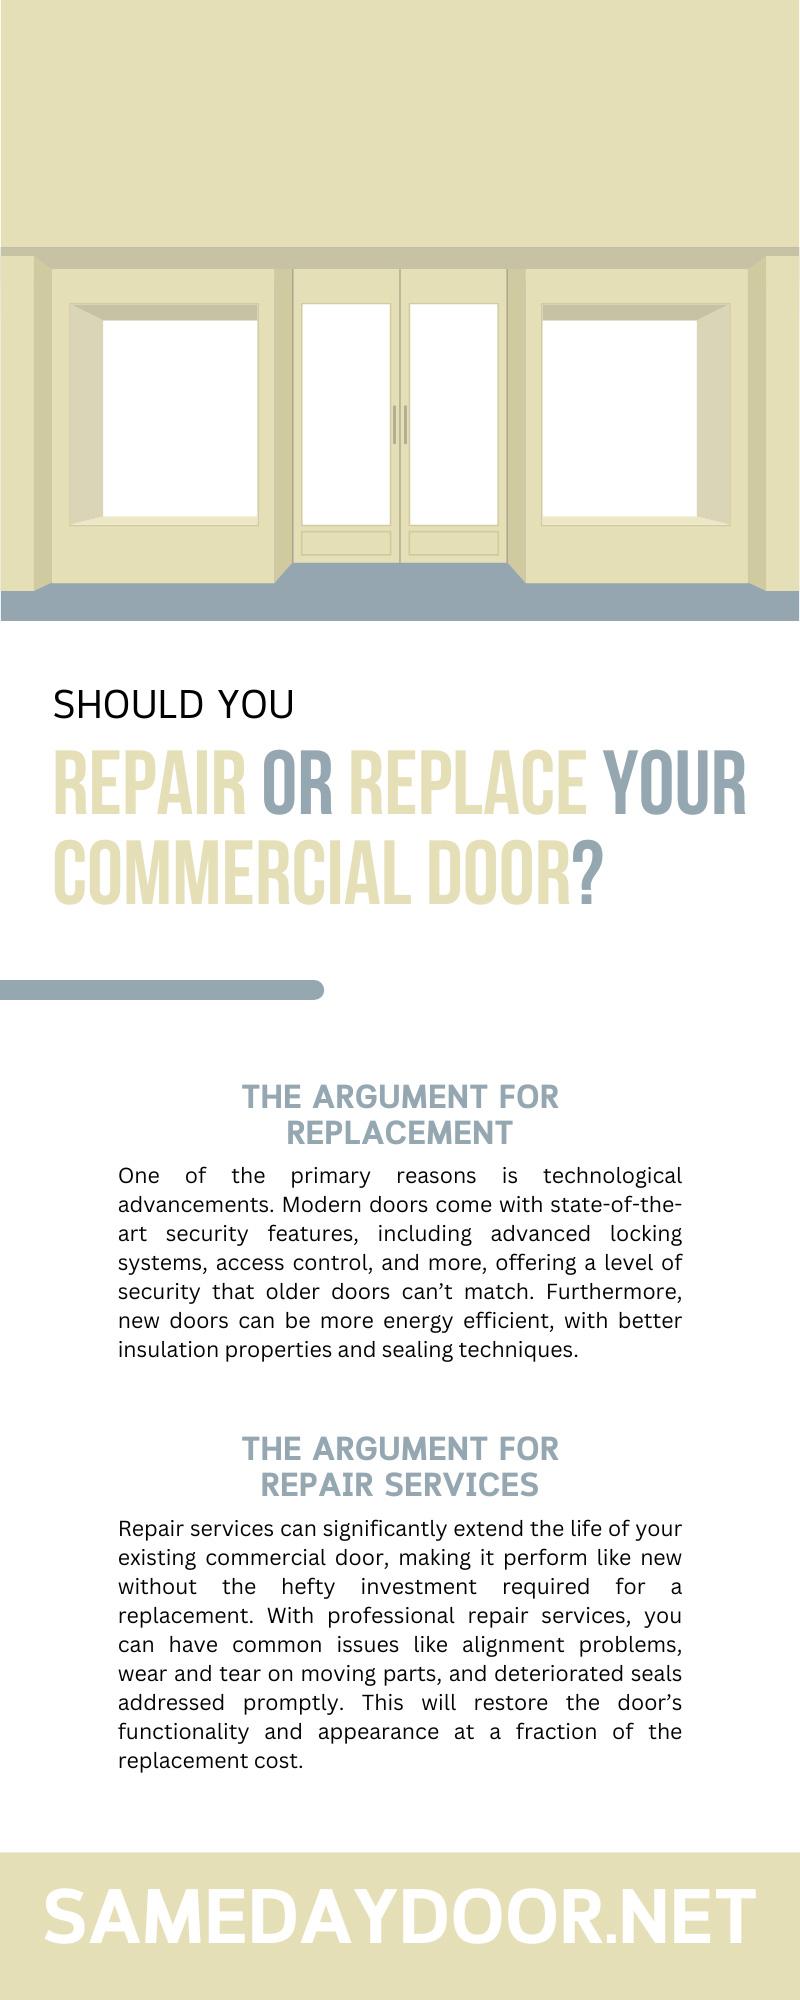 Should You Repair or Replace Your Commercial Door?